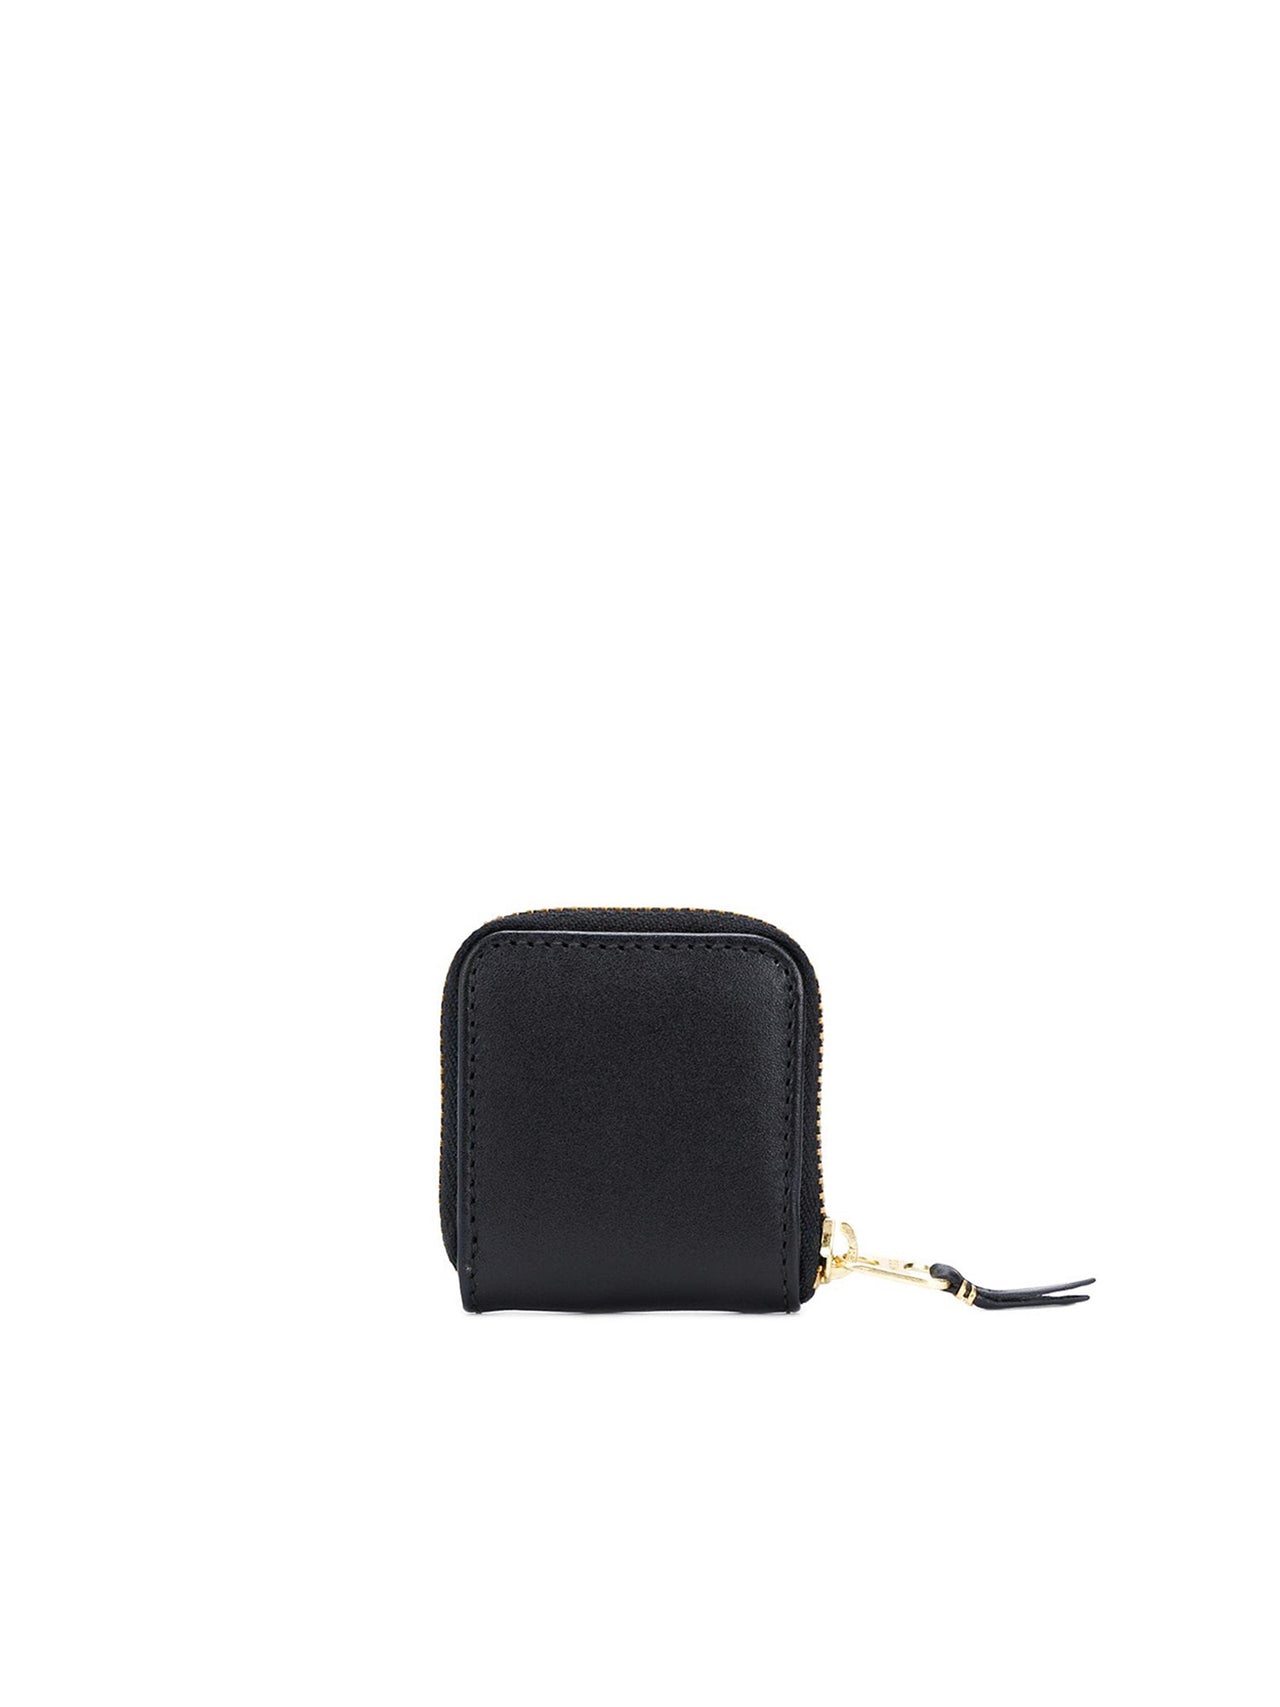 CdG Wallet / CLASSIC LEATHER COIN CASE(BLACK)